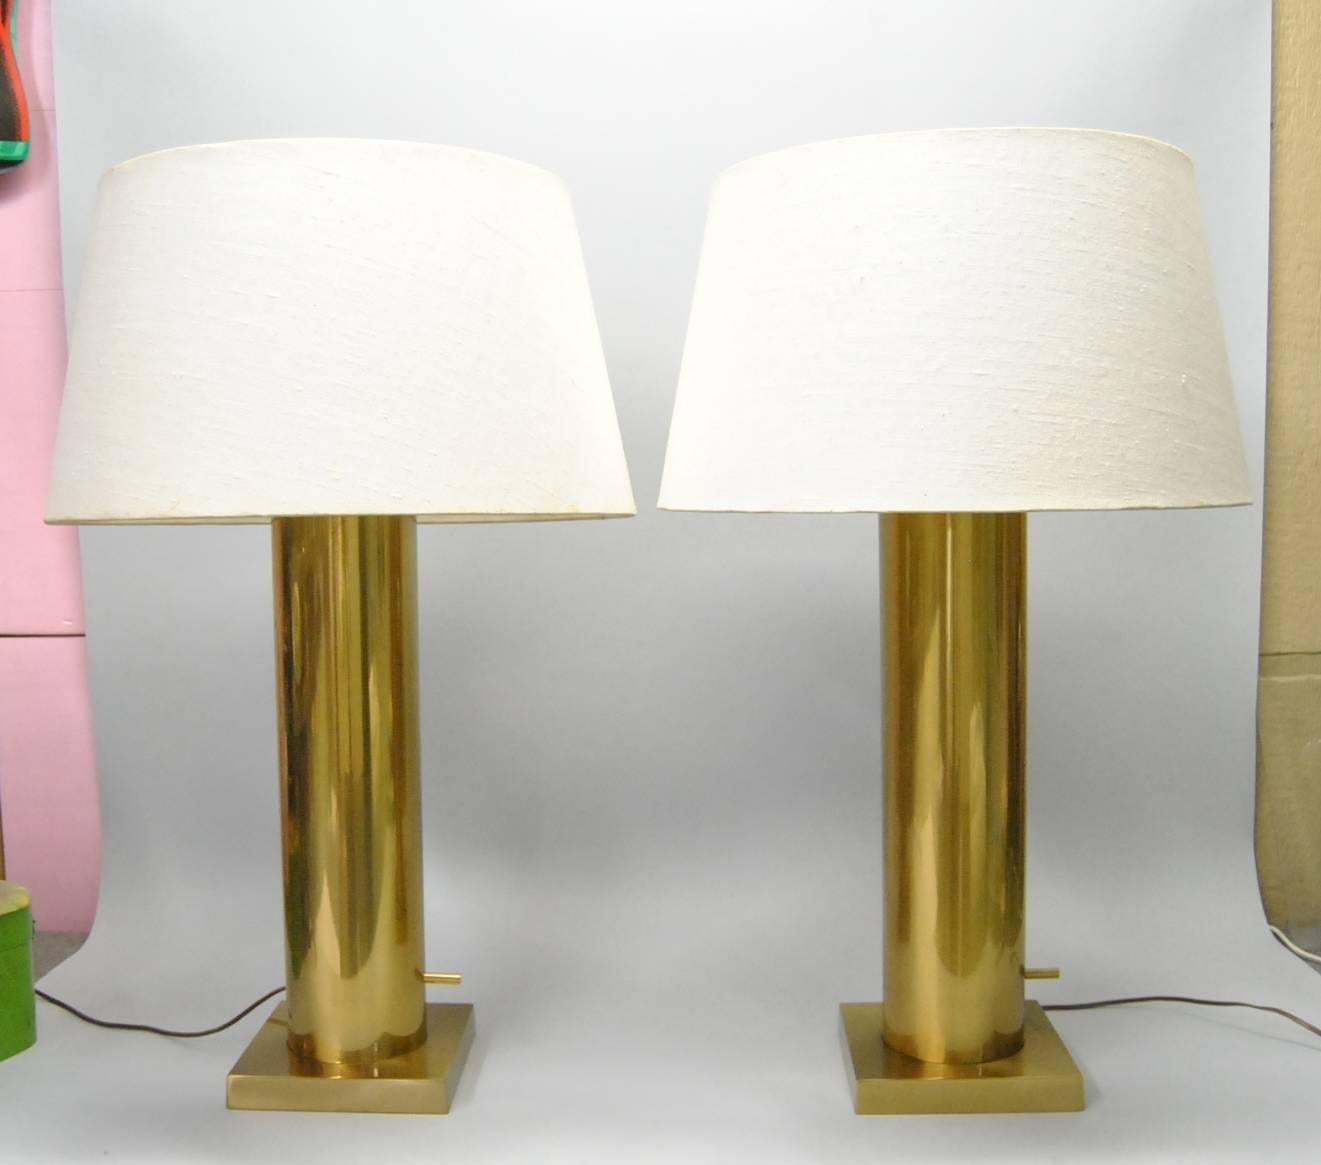 A great pair of Mid-Century cylinder lamps by Stiffel. Clean, crisp lines on these lamps make them a standout in just about any decor. A 7.5